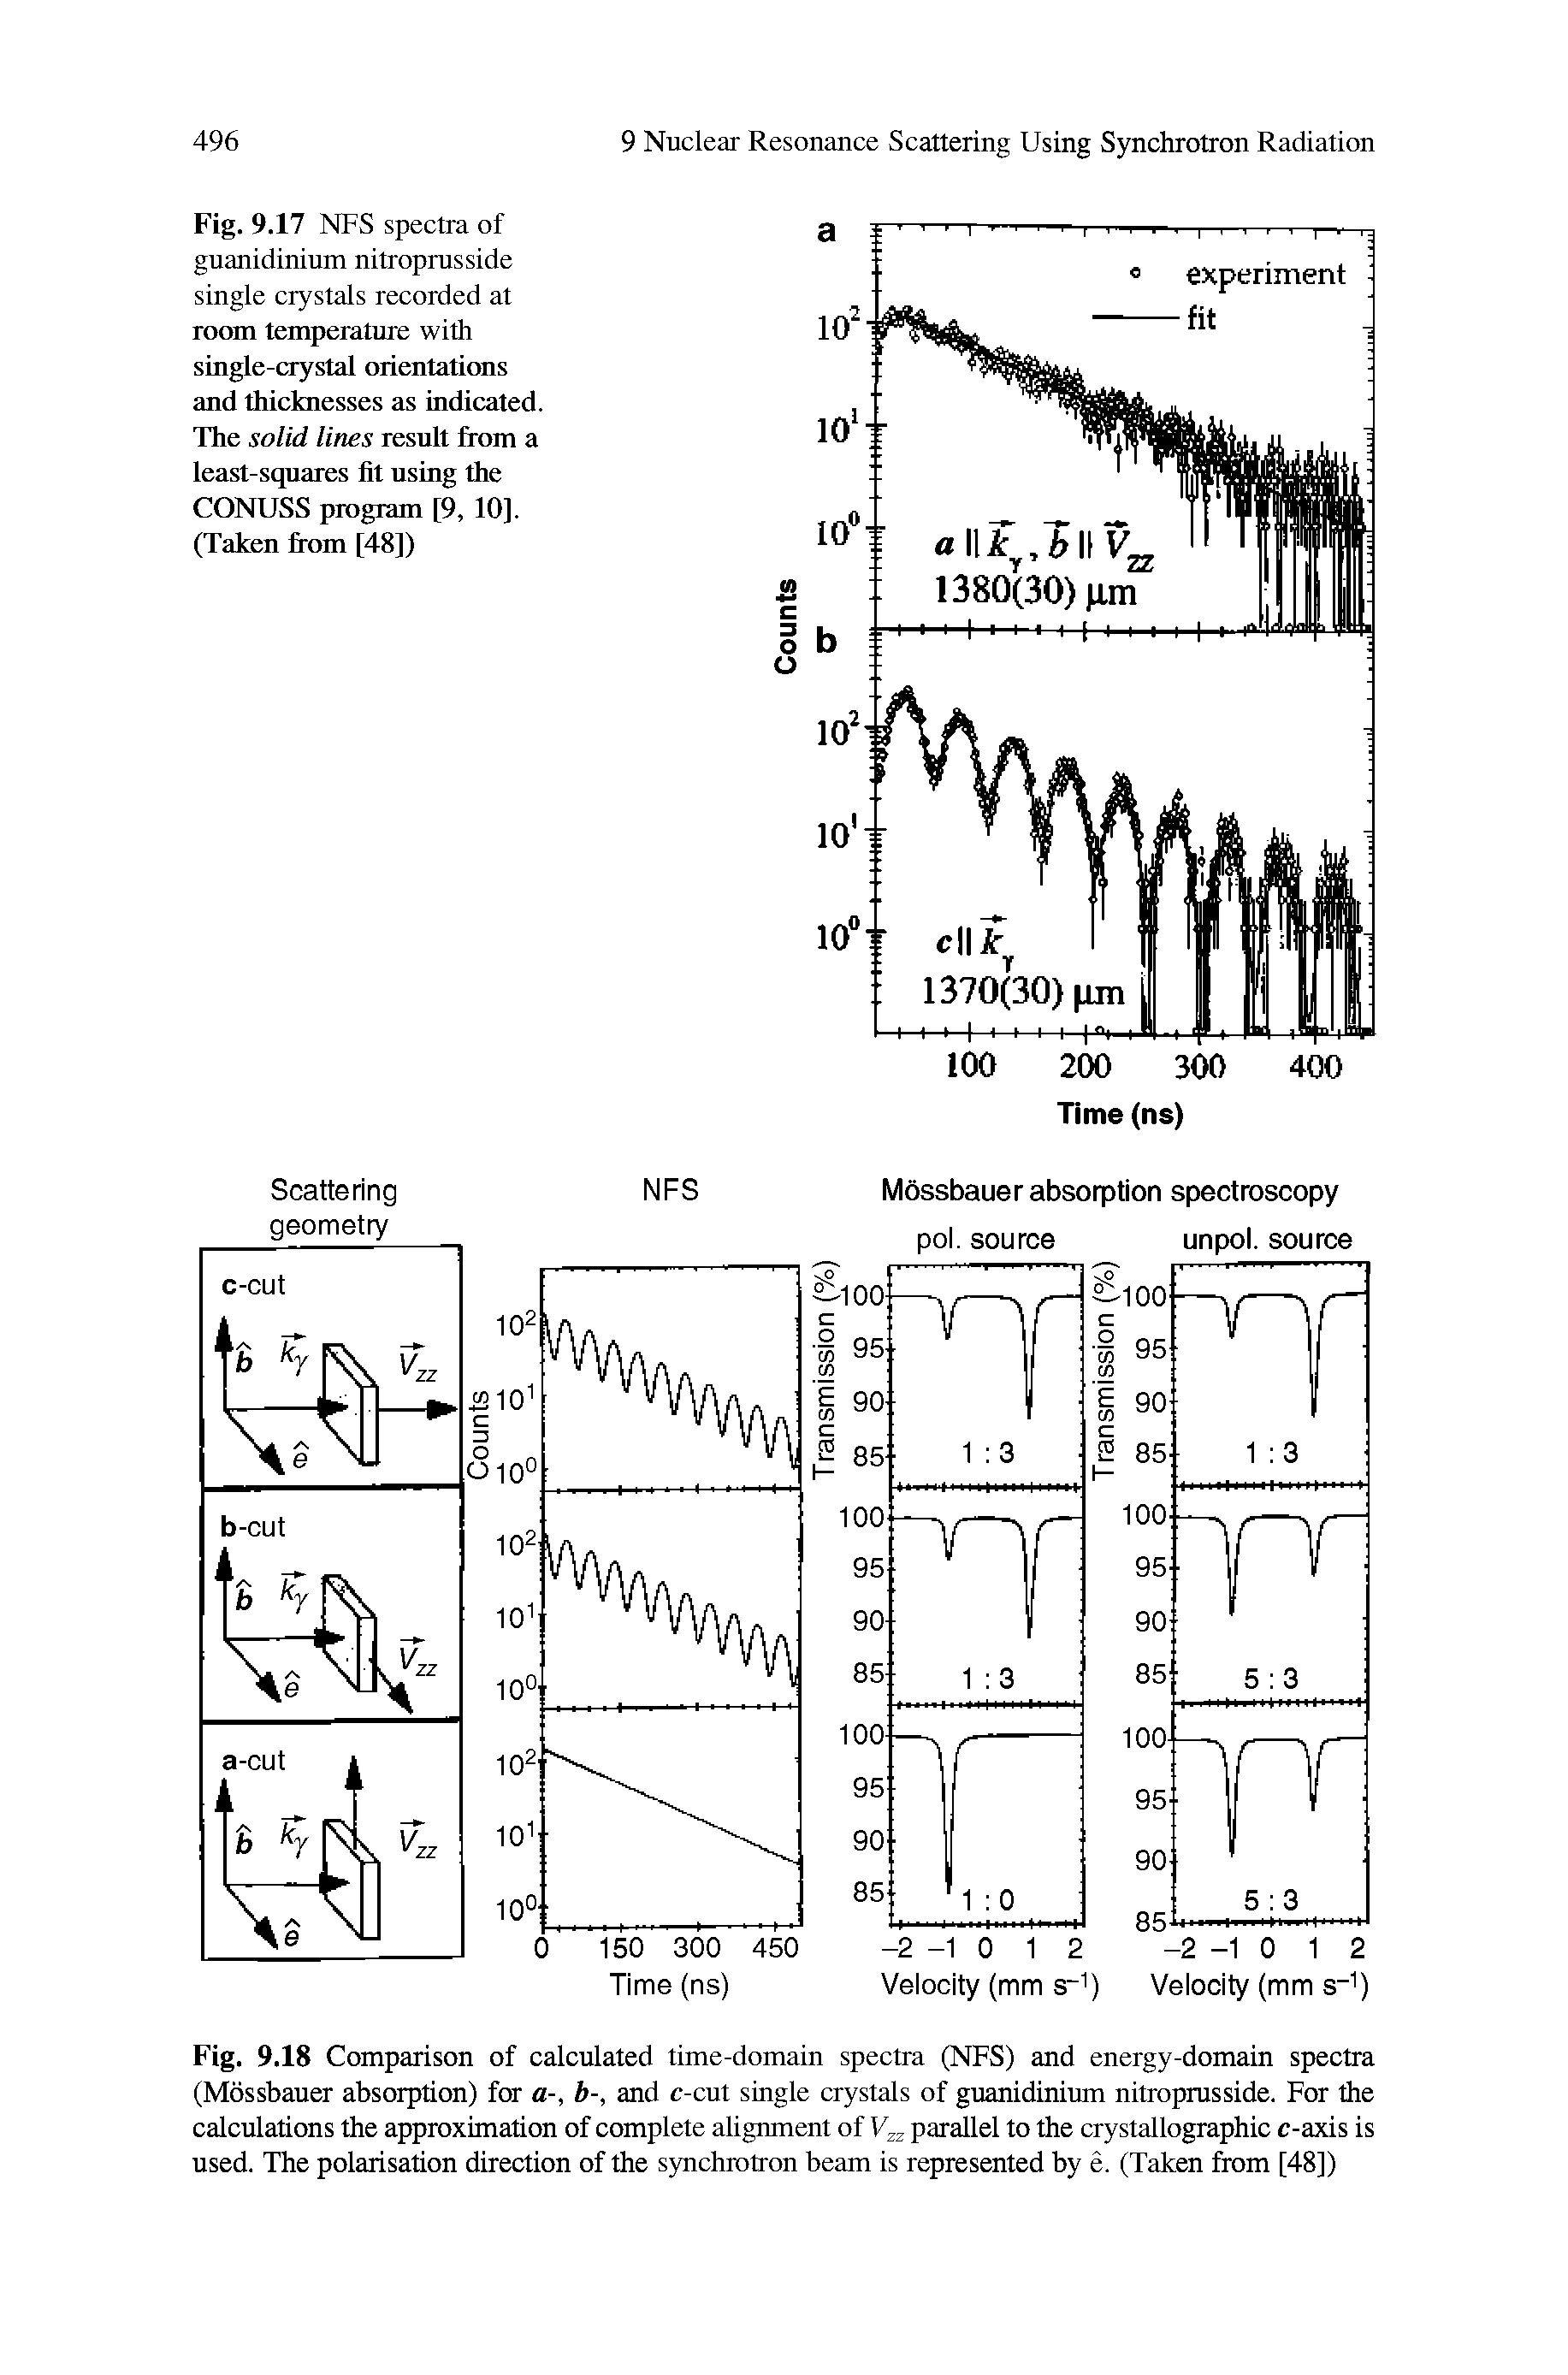 Fig. 9.18 Comparison of calculated time-domain spectra (NFS) and energy-domain spectra (Mossbauer absorption) for a-, b-, and c-cut single crystals of guanidinium nitroprusside. For the calculations the approximation of complete alignment of 14 parallel to the crystallographic c-axis is used. The polarisation direction of the synchrotron beam is represented by e. (Taken from [48])...